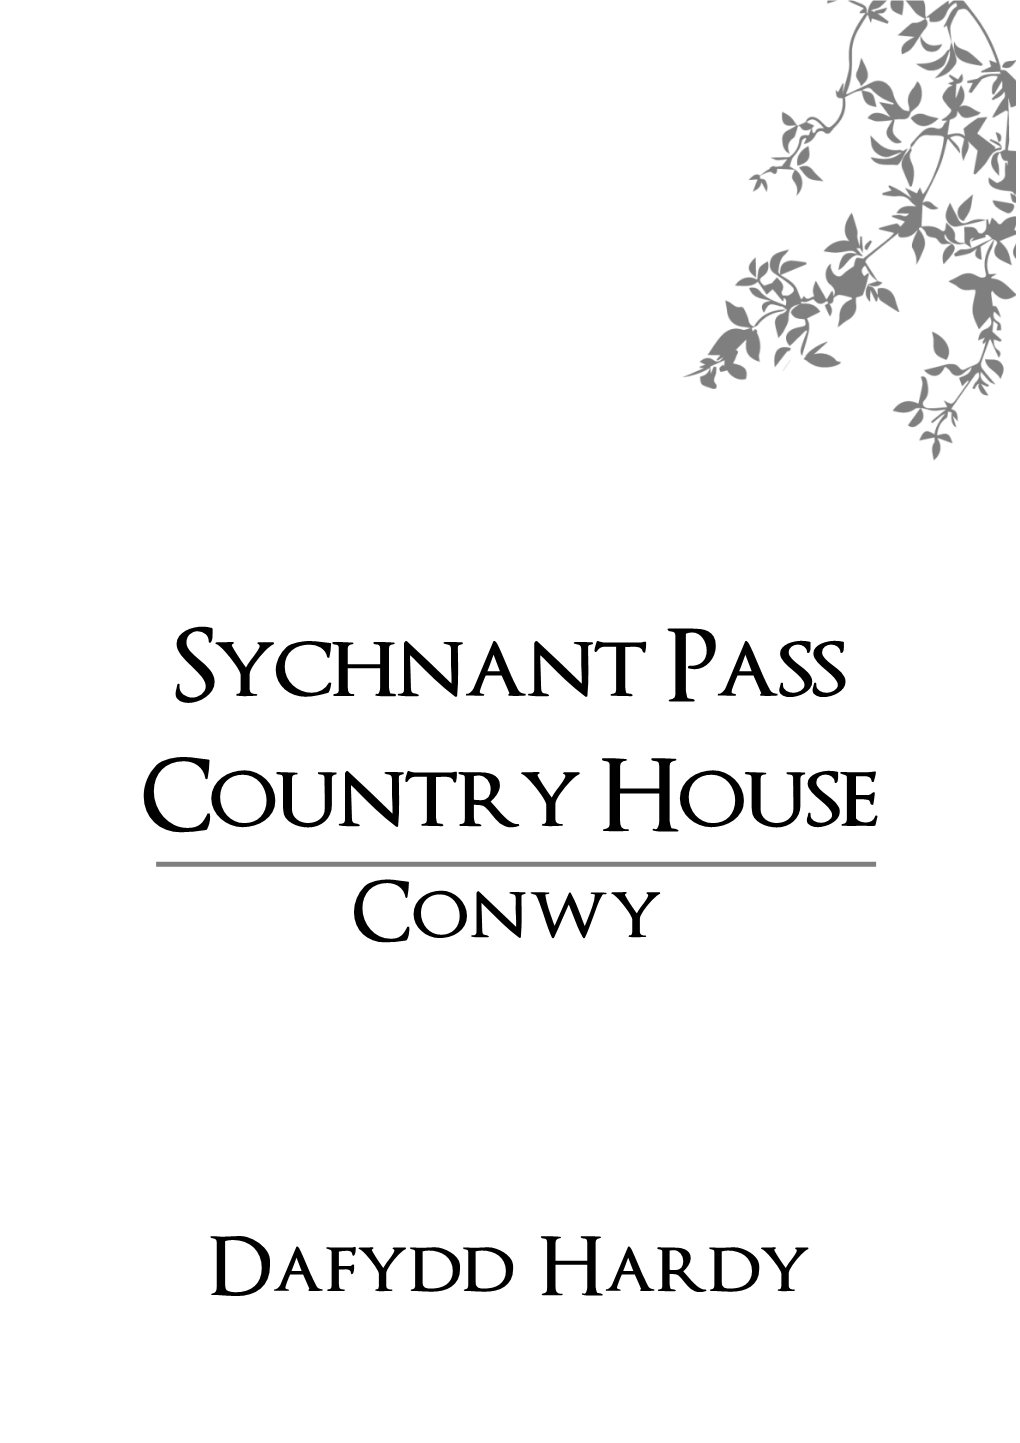 Sychnant Pass Country House Conwy